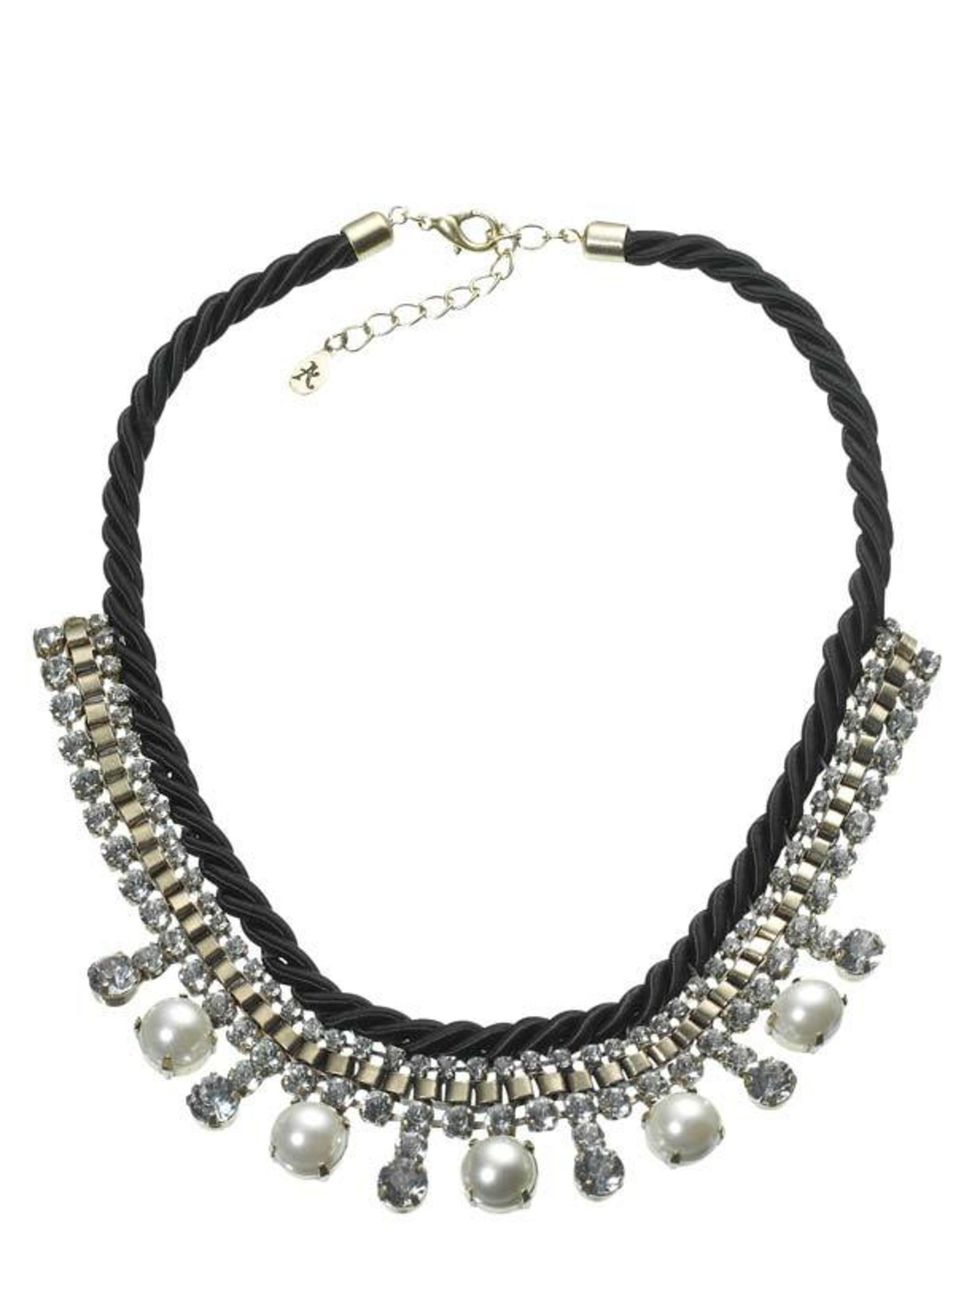 <p>Rhinestone and pearl necklace, £16, by <a href="http://www.monsoon.co.uk/invt/58266608">Accessorize</a></p>